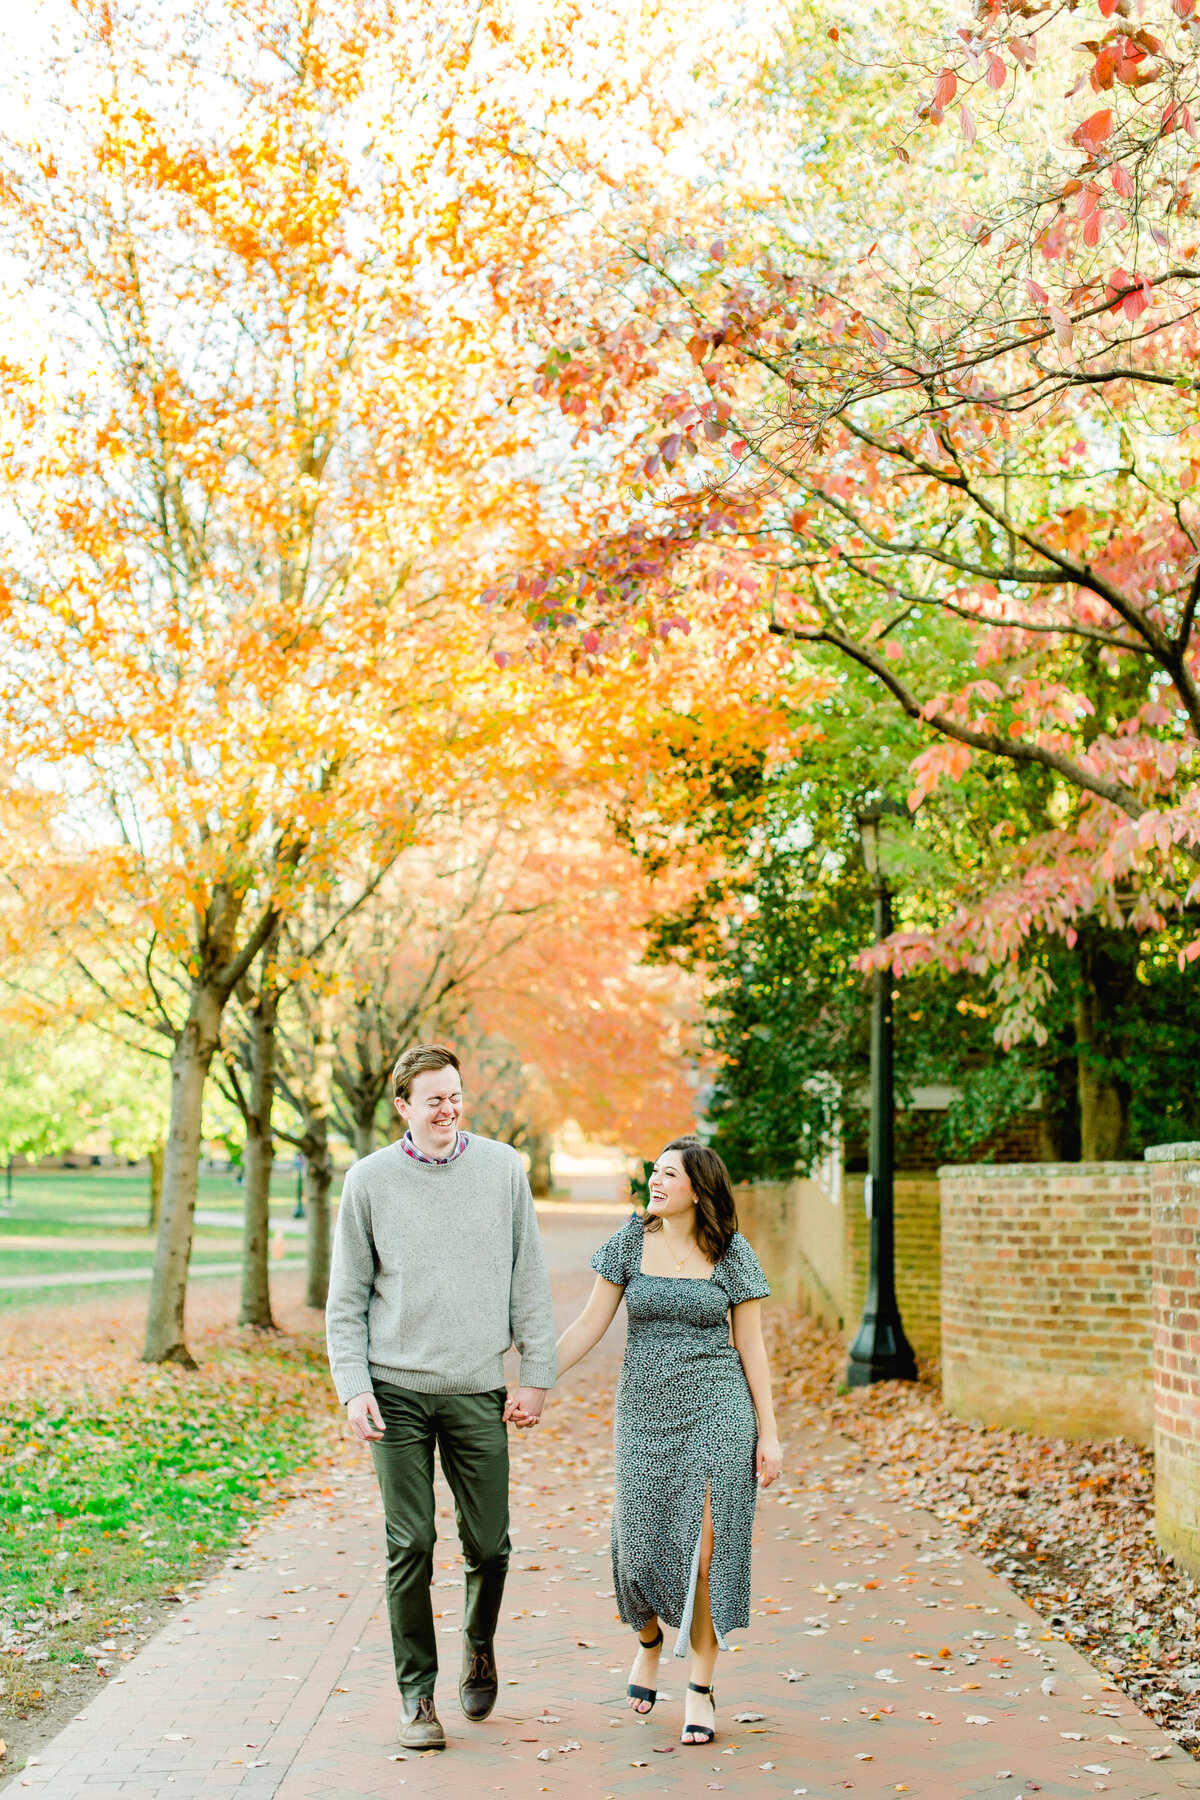 Charlottesville Engagement | ©Ailyn La Torre Photography 2020-56767-Edit